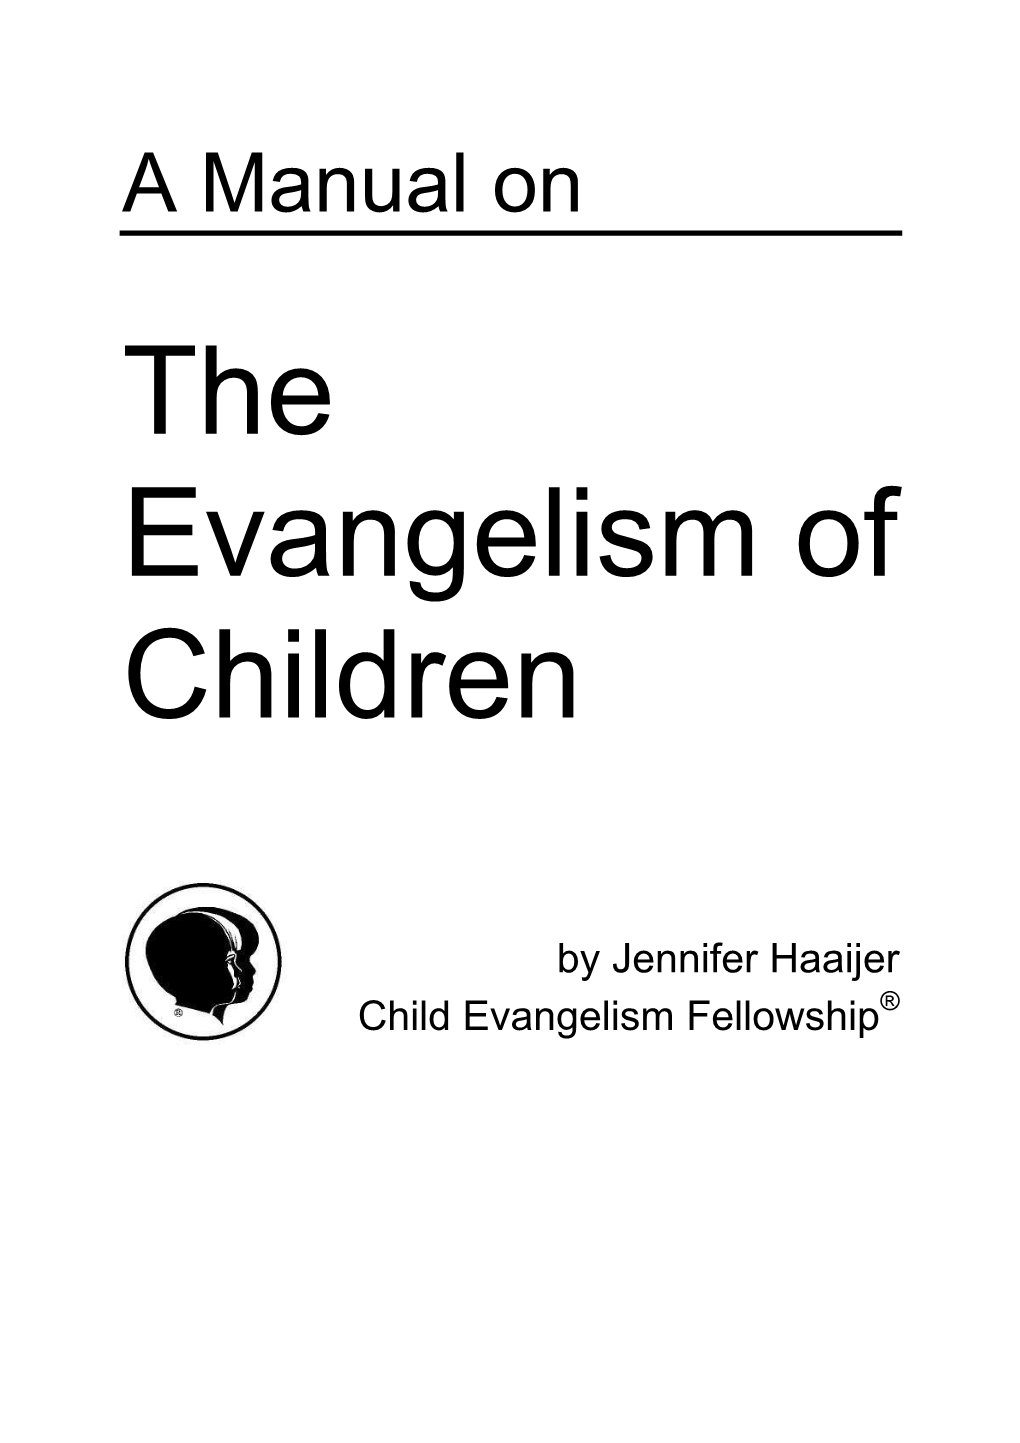 A Manual on the Evangelism of Children